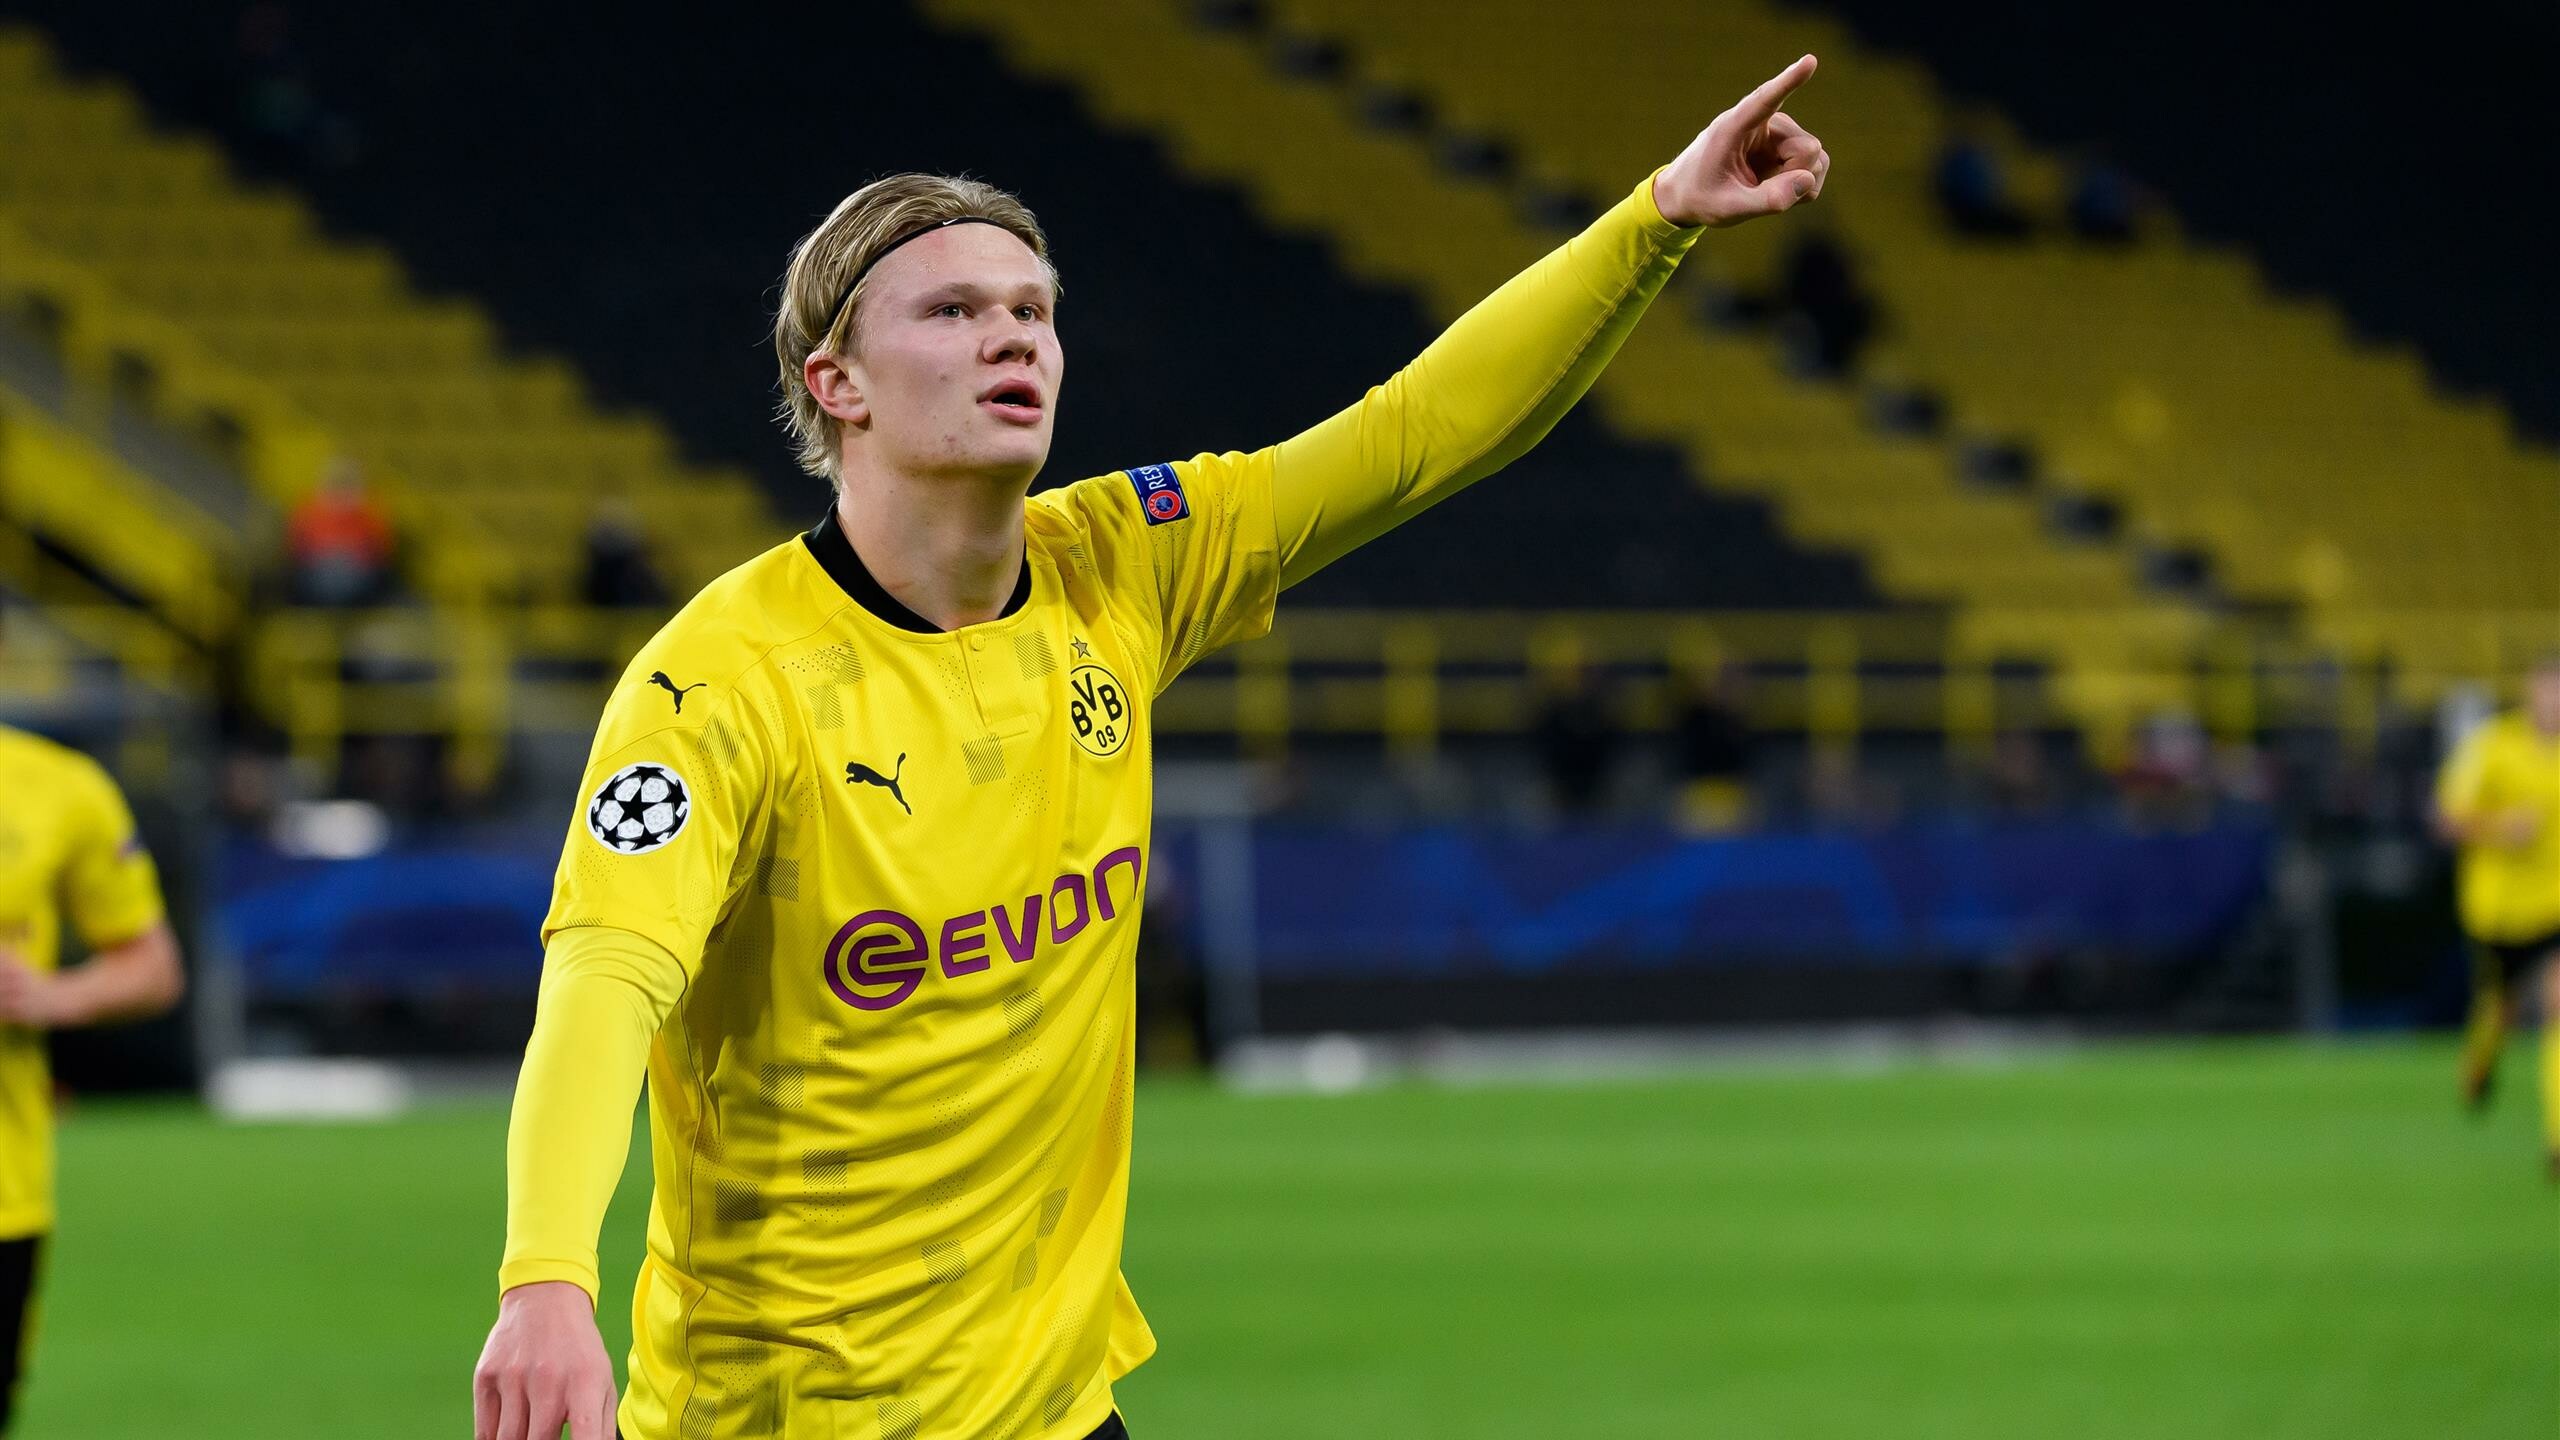 Erling Haaland: The first Bundesliga player to score five goals in his opening two matches, as well as the fastest player to reach that tally. 2560x1440 HD Wallpaper.